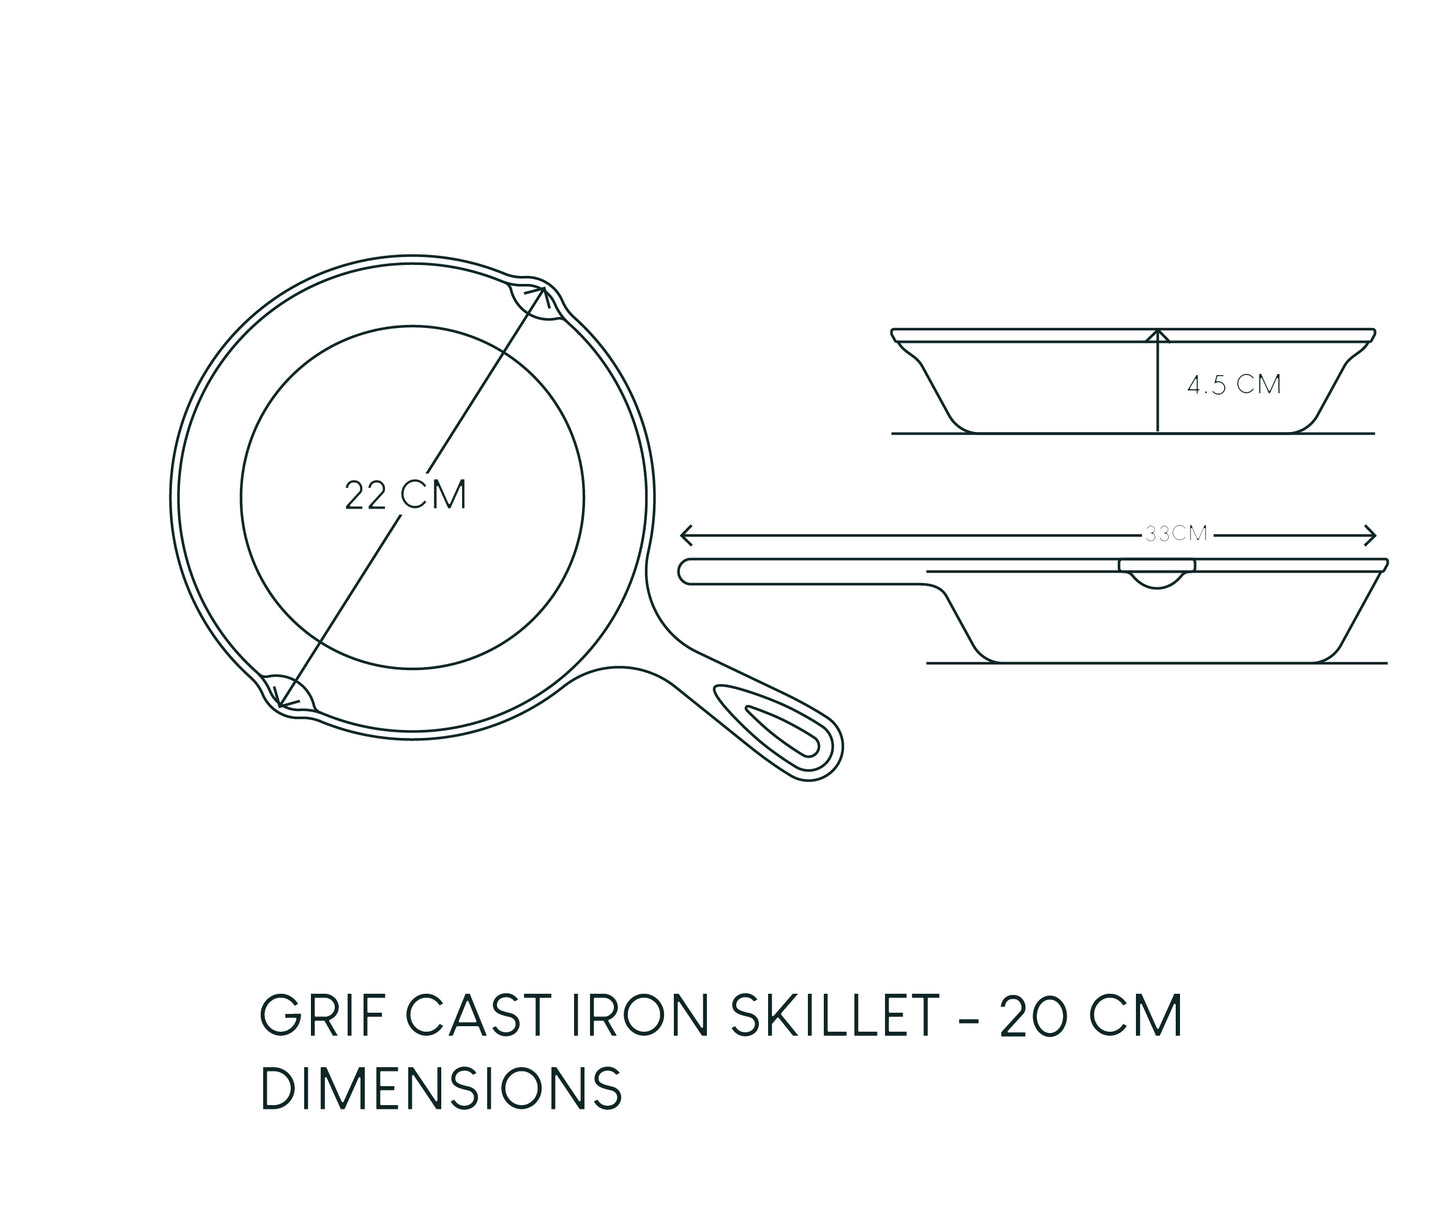 Cast Iron Skillet - 6.5” Dimensions & Drawings